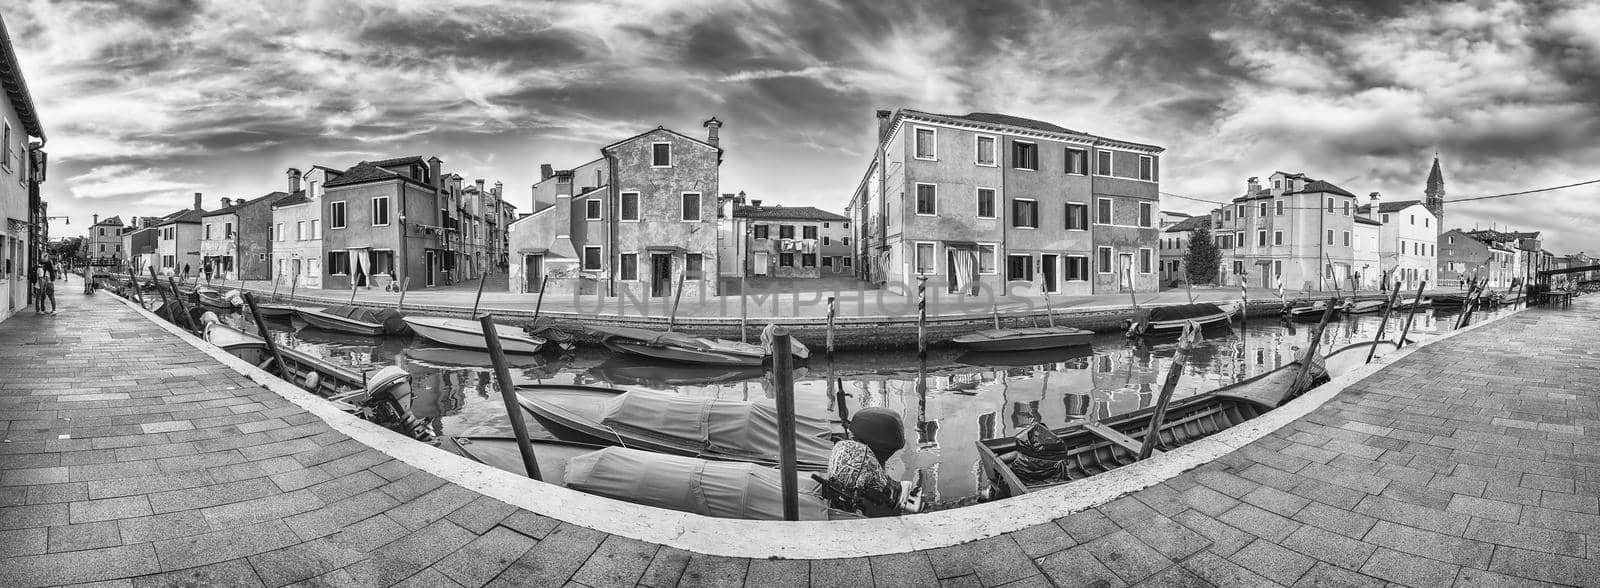 Picturesque architecture along the canal, island of Burano, Venice, Italy by marcorubino